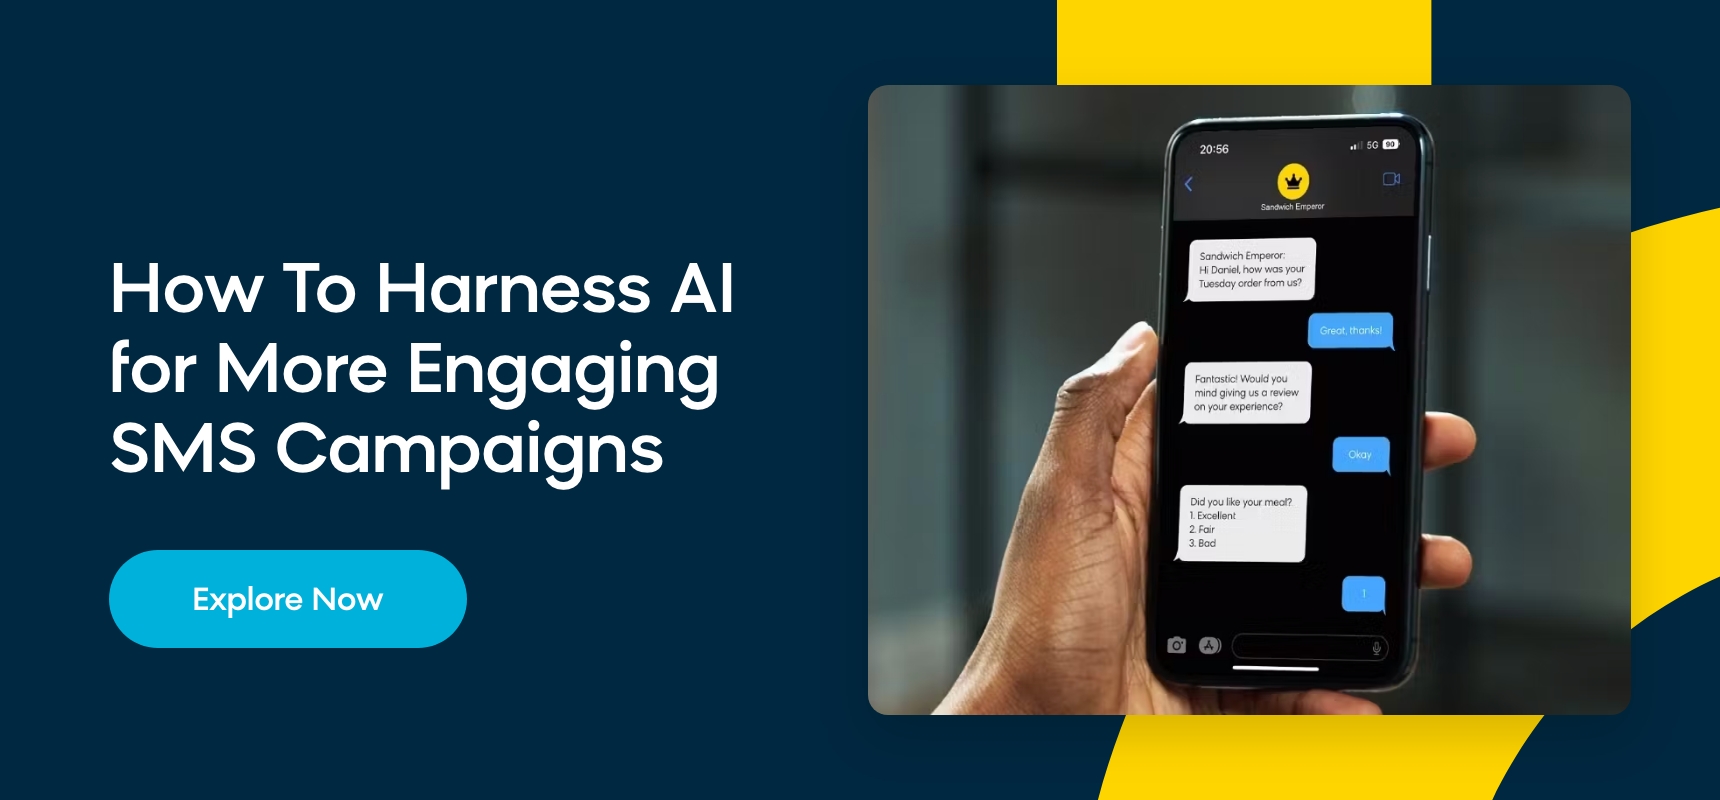 How to harness AI for more engaging SMS campaigns